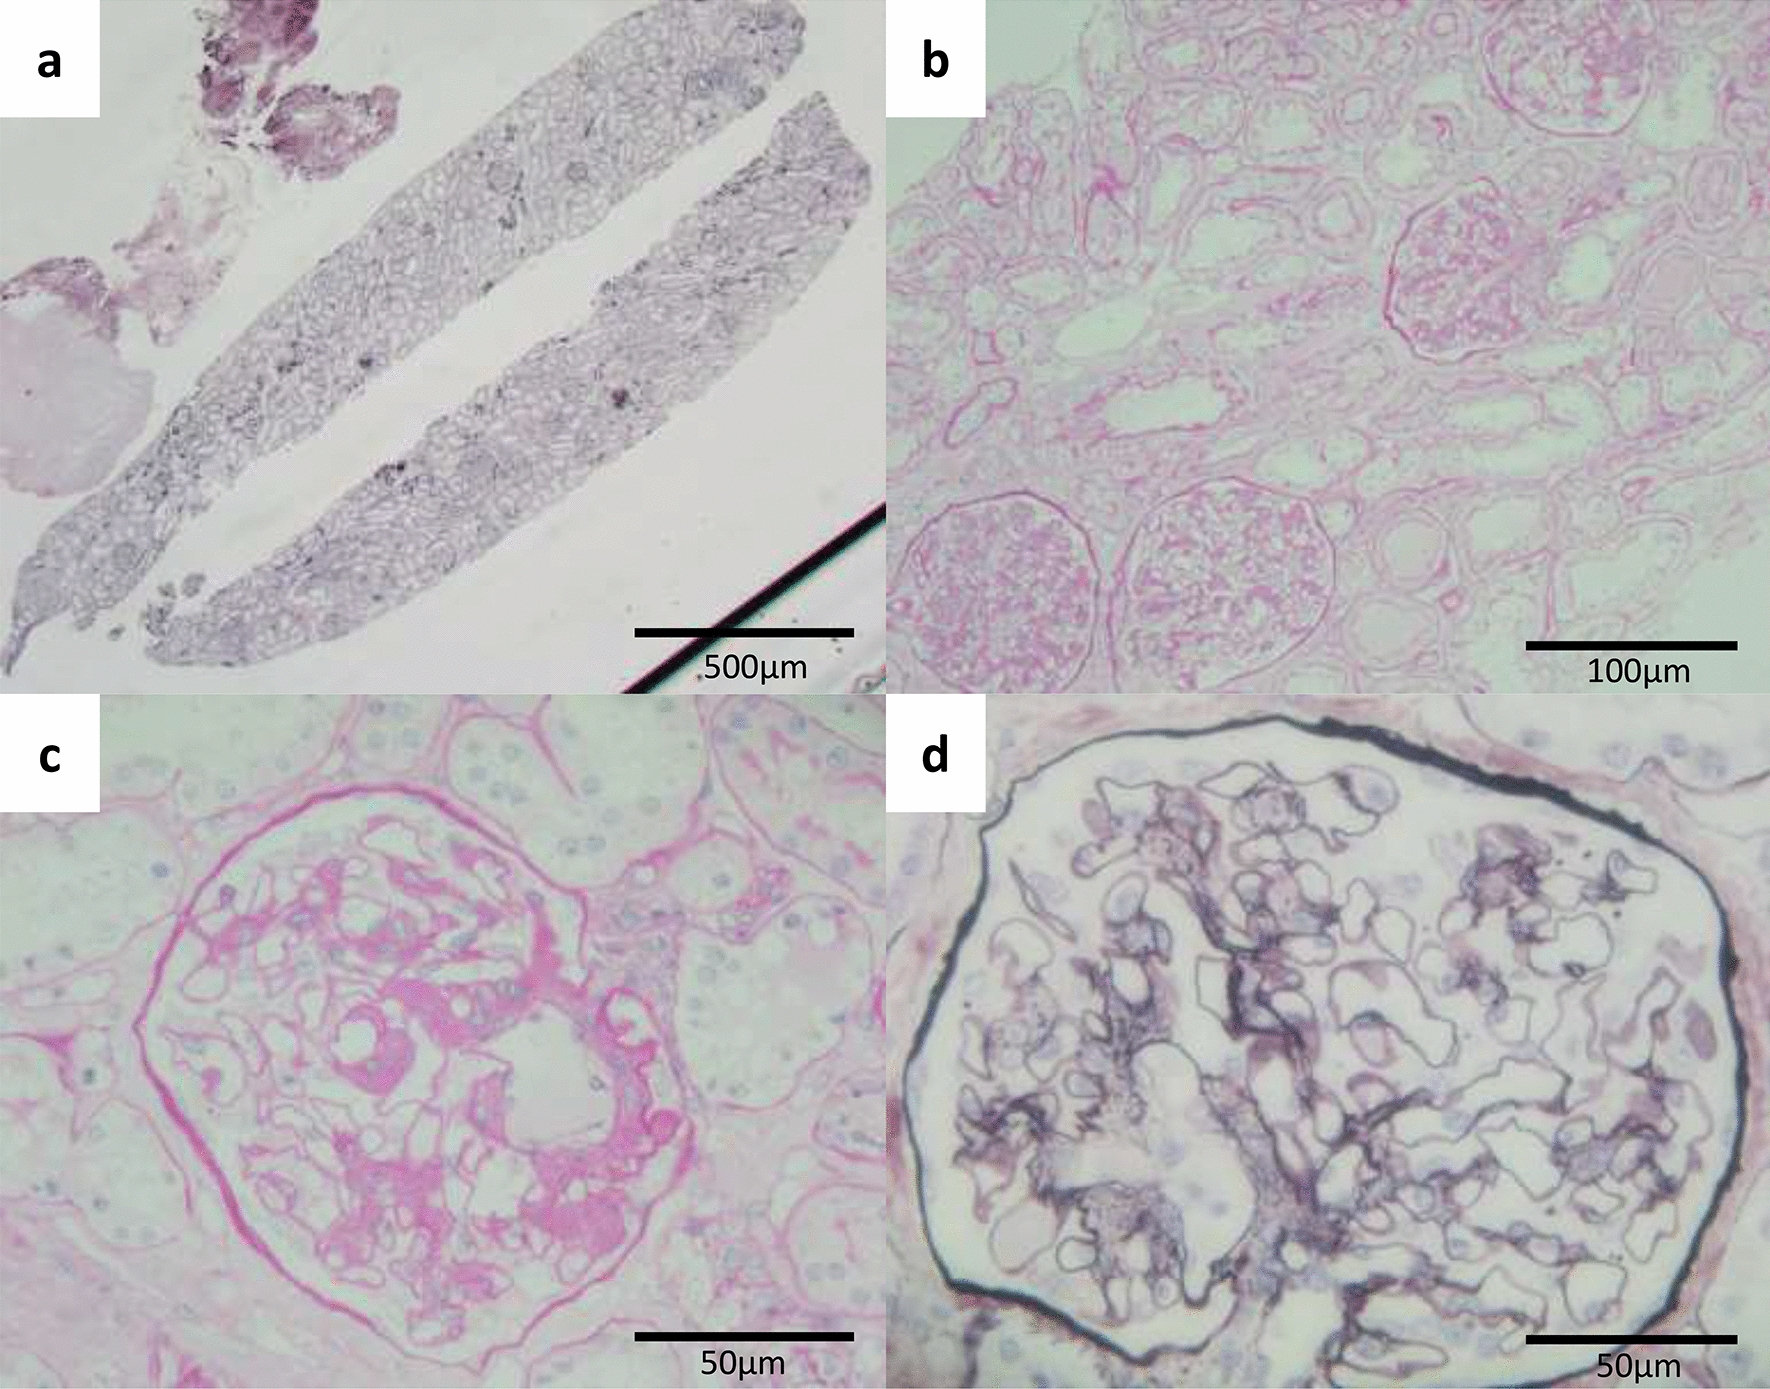 A case of non-lupus full-house nephropathy diagnosed by kidney biopsy but observed IgA nephropathy on second biopsy